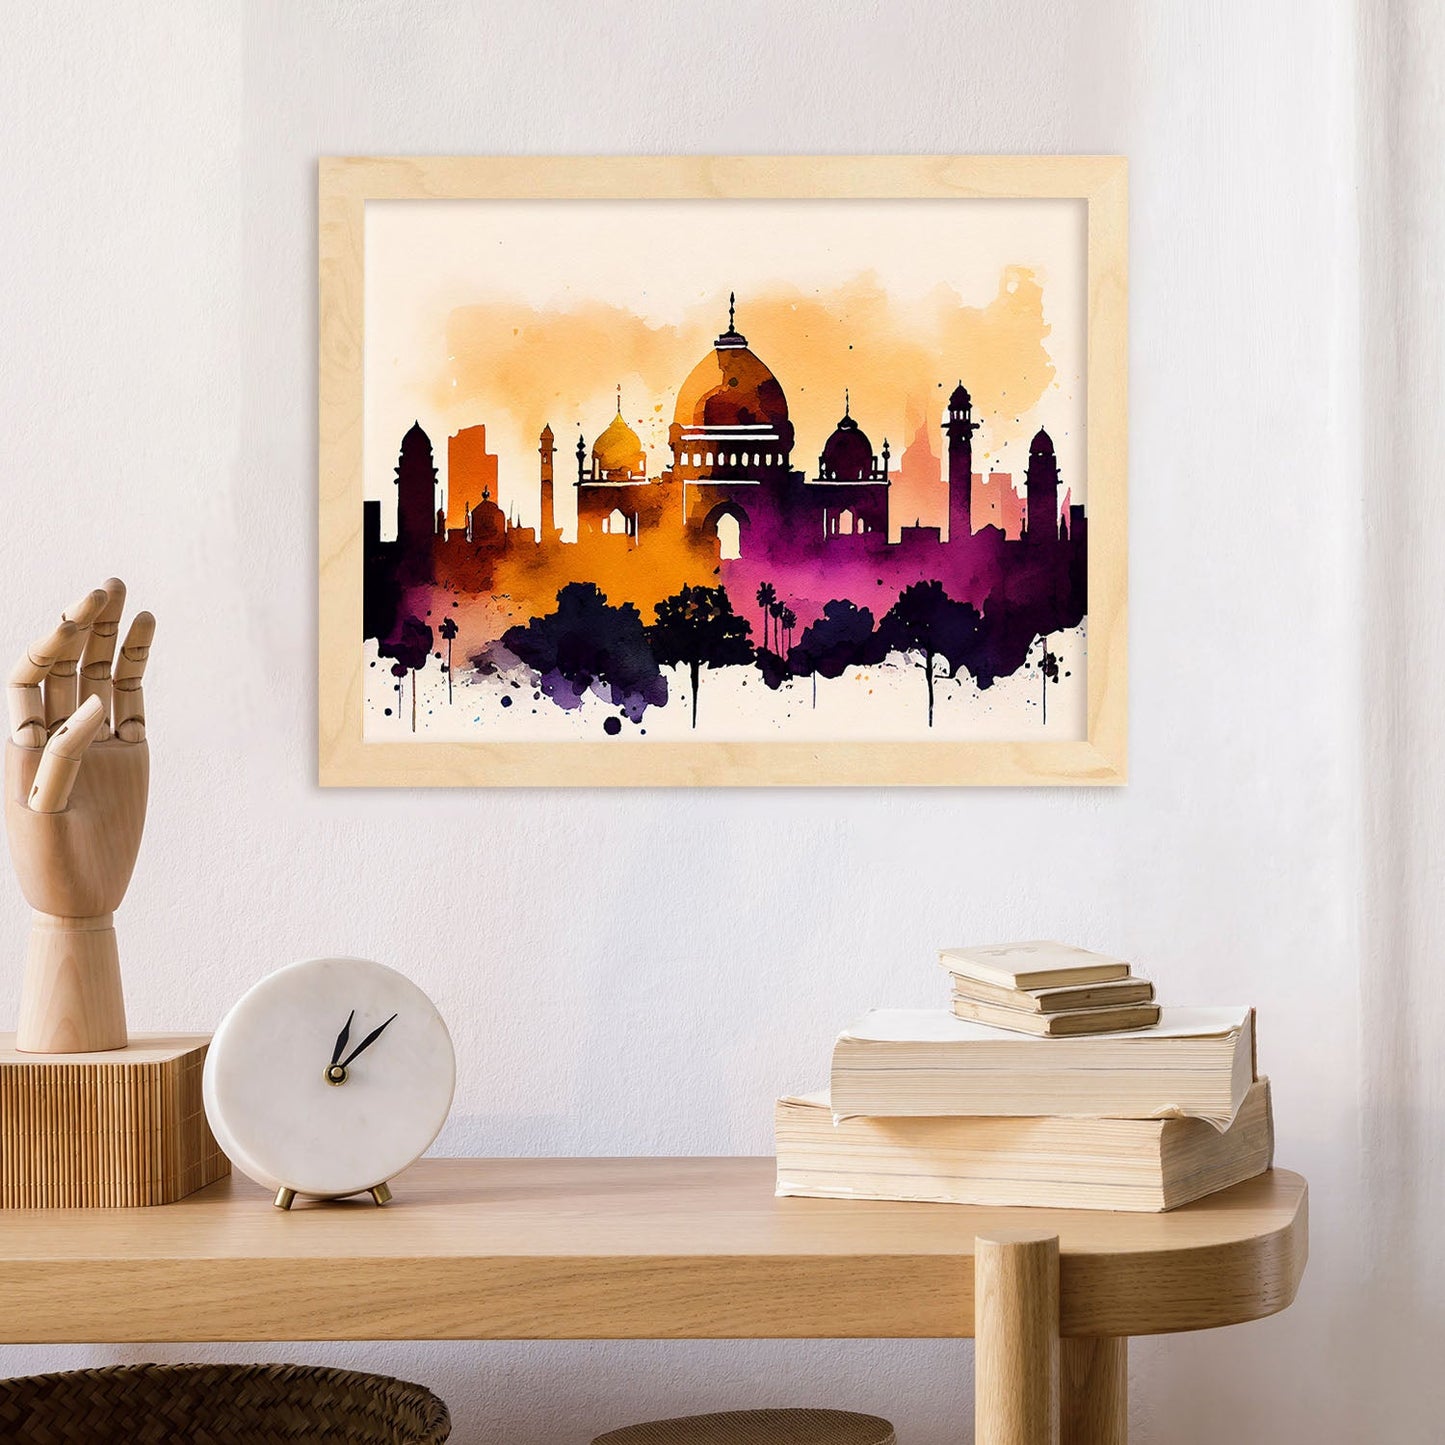 Nacnic watercolor of a skyline of the city of Delhi. Aesthetic Wall Art Prints for Bedroom or Living Room Design.